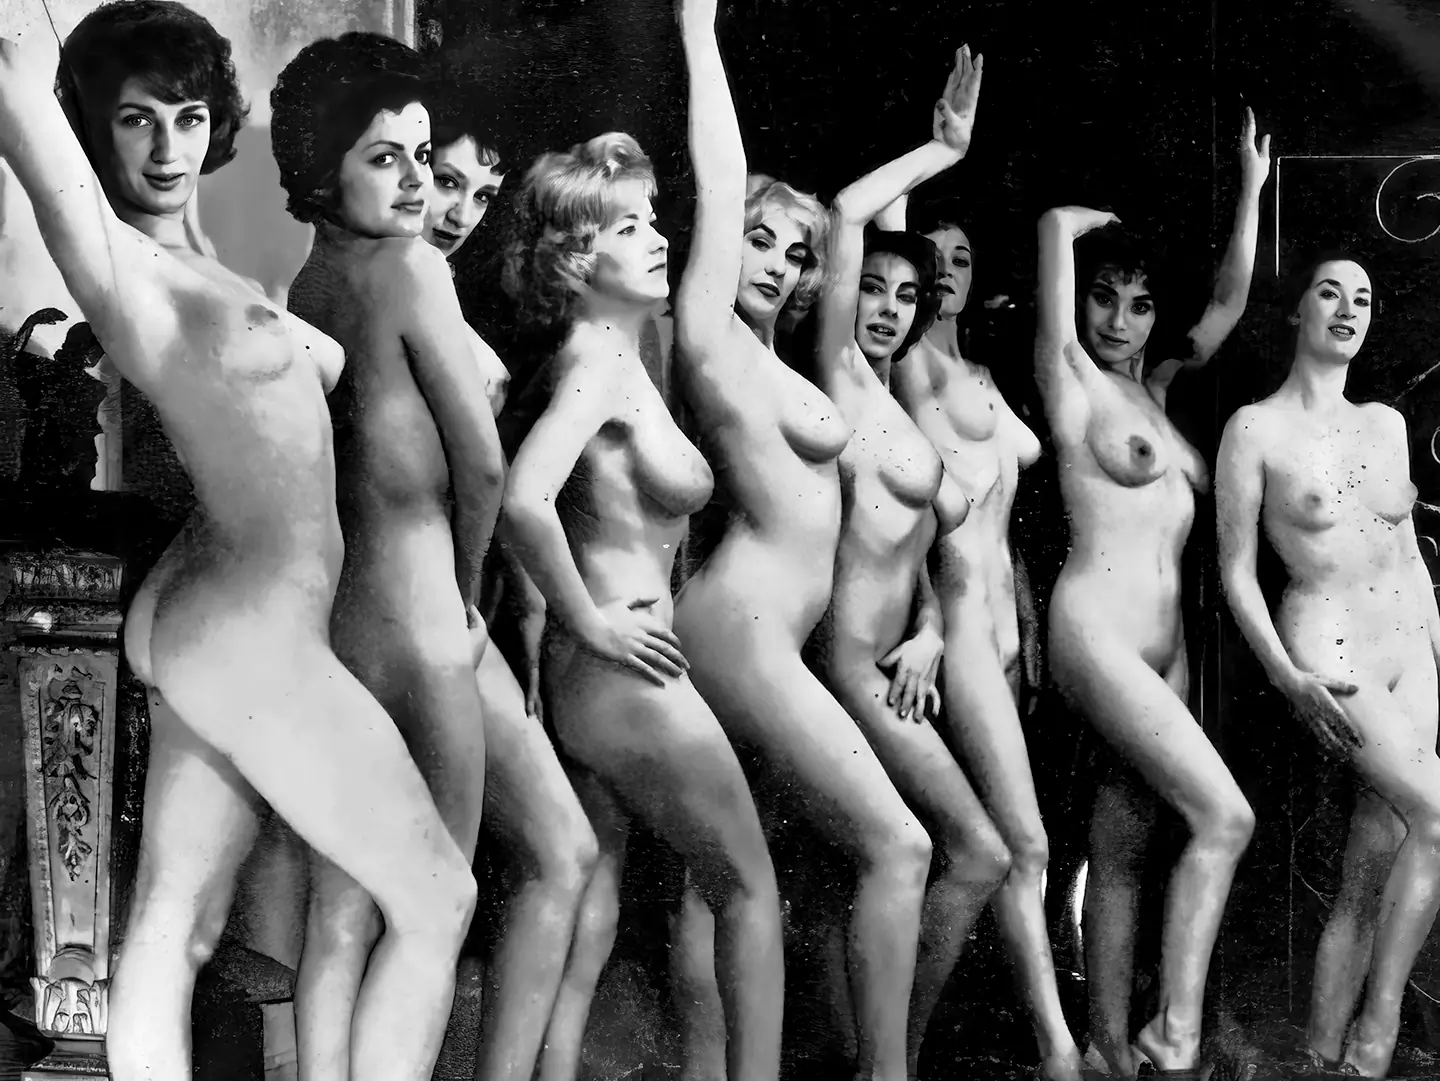 Vintage dancer porn videos with eight completely nude women exposing their tits and pussies onstage